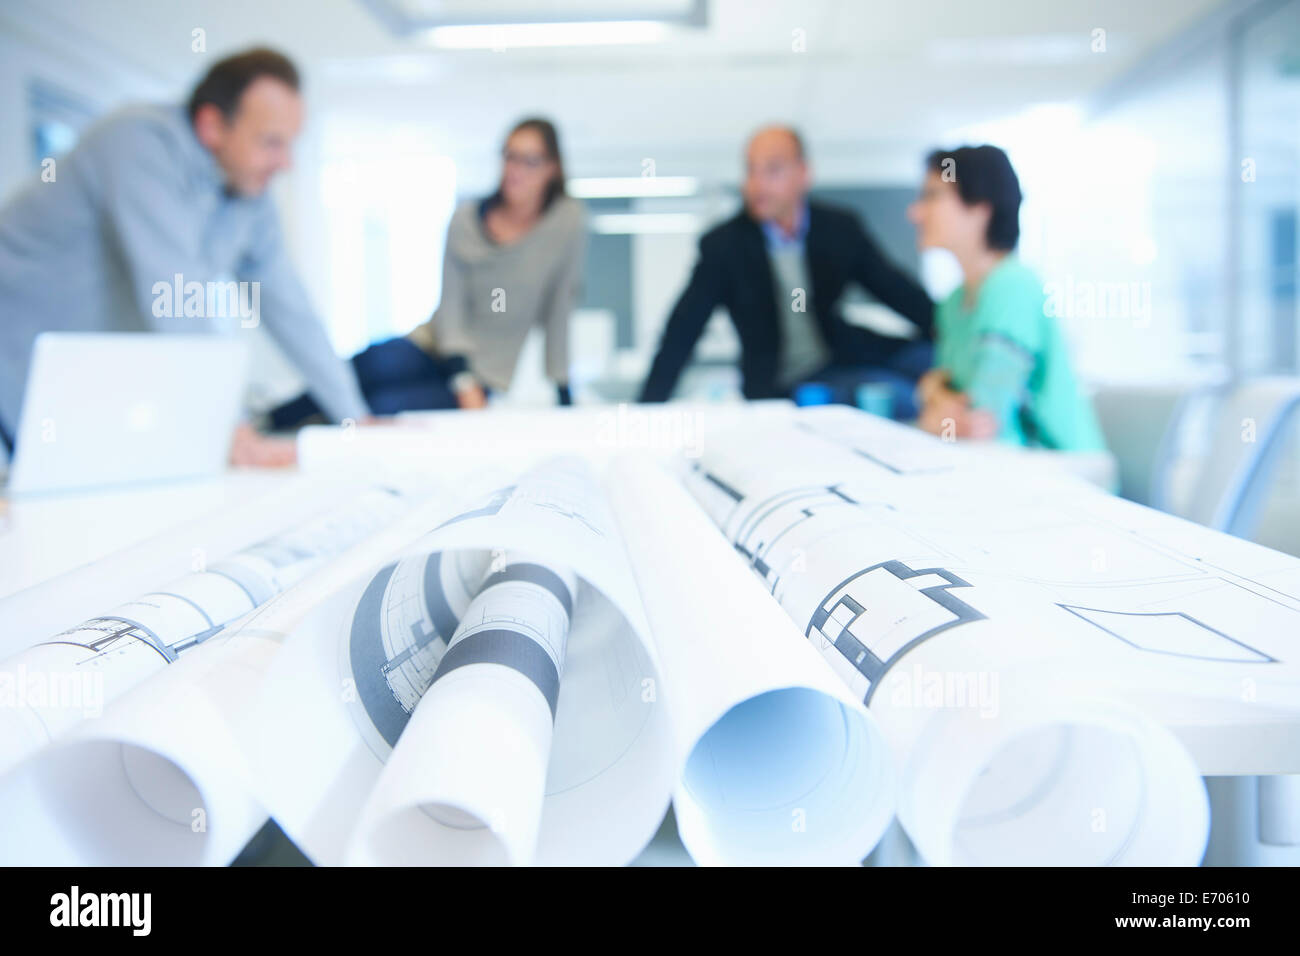 Group of business people discussing plans Stock Photo